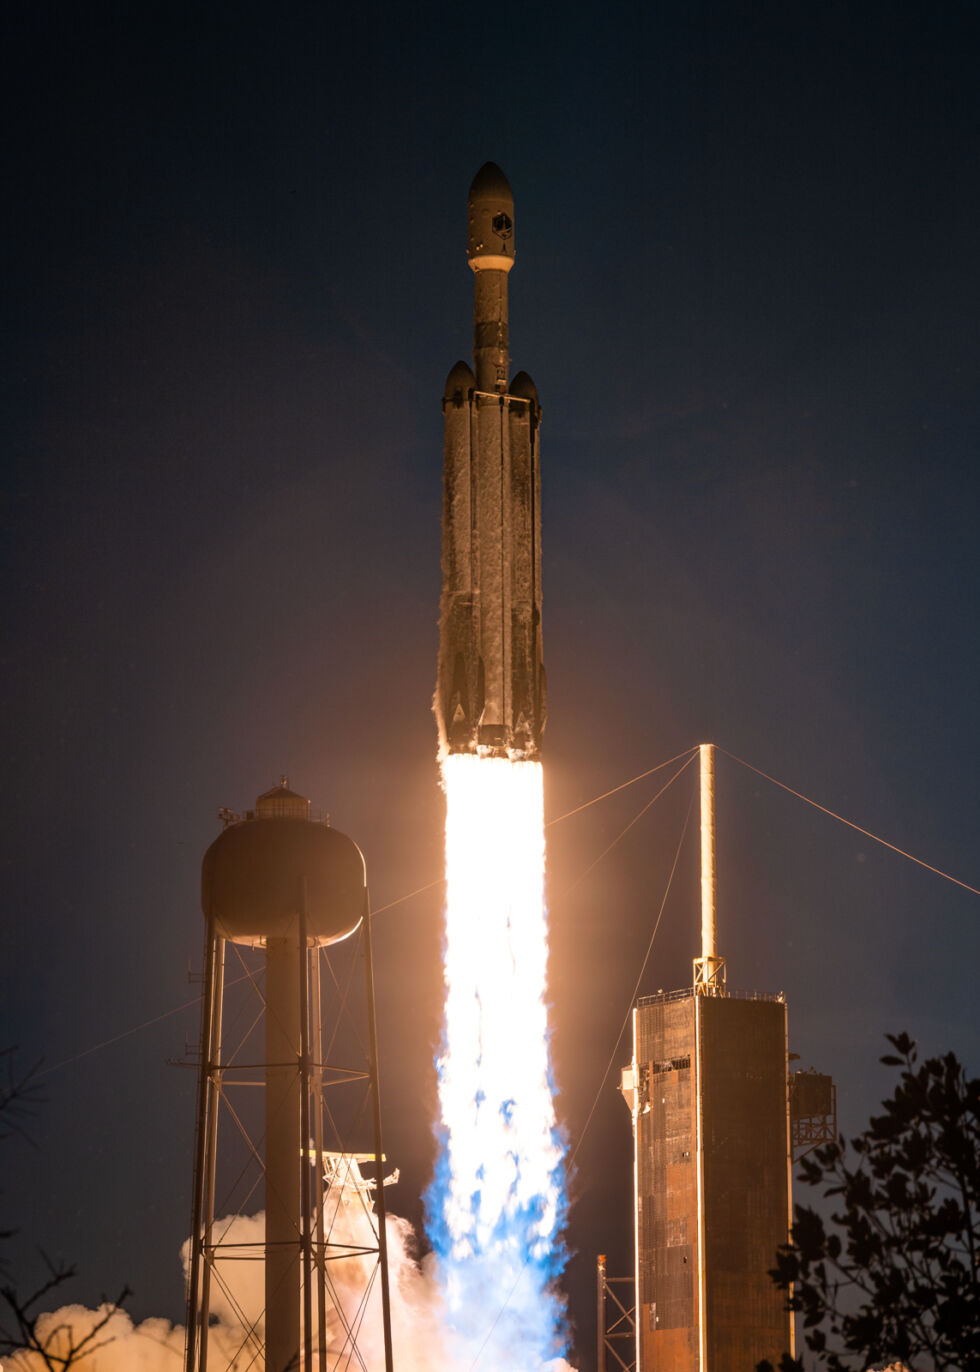 The rocket lifted off at 5:56 pm ET (22:56 UTC) on Sunday.